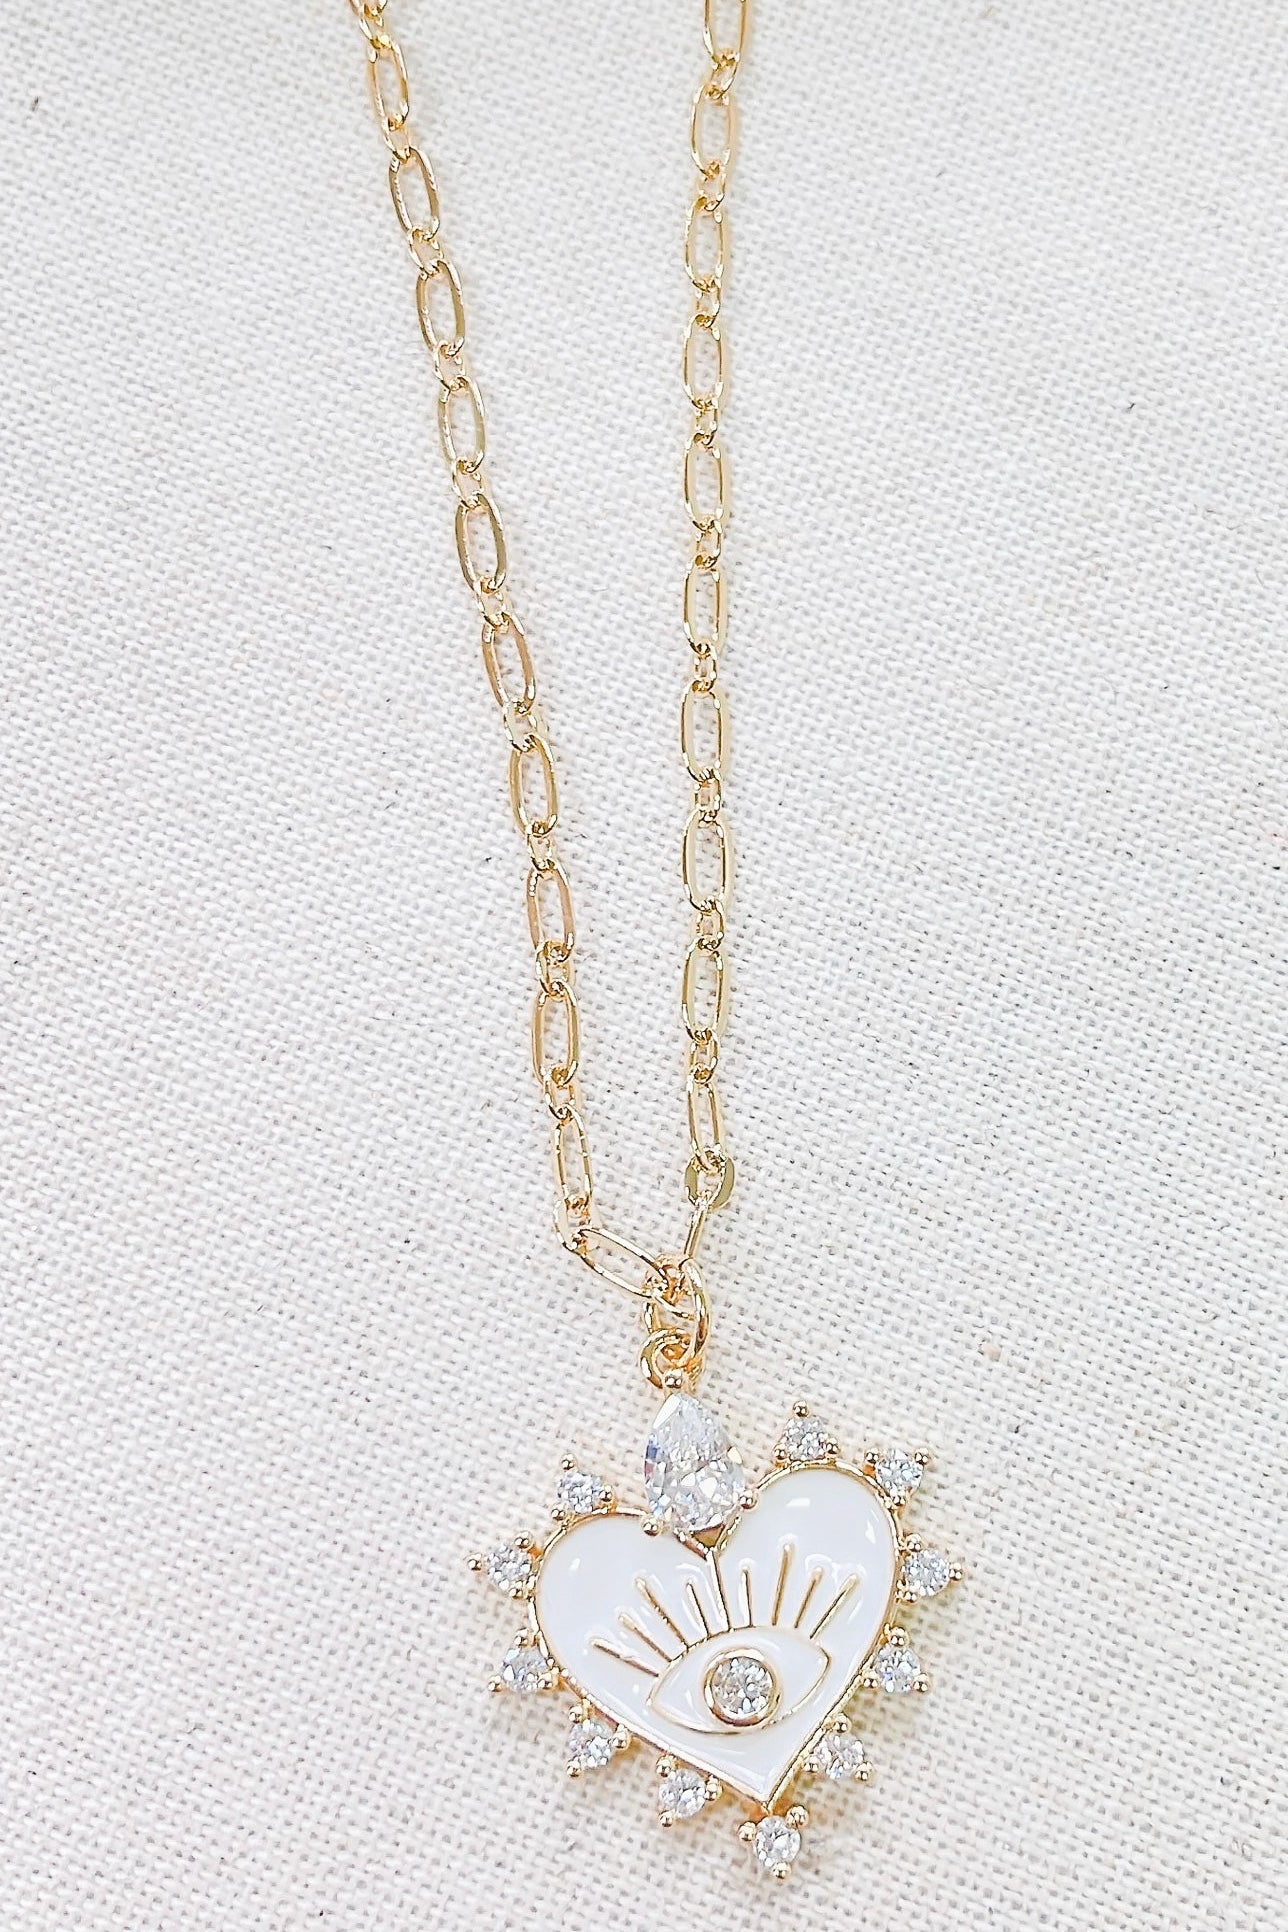 Eye See You White Crystal Heart Necklace - Kendry Collection Boutique 